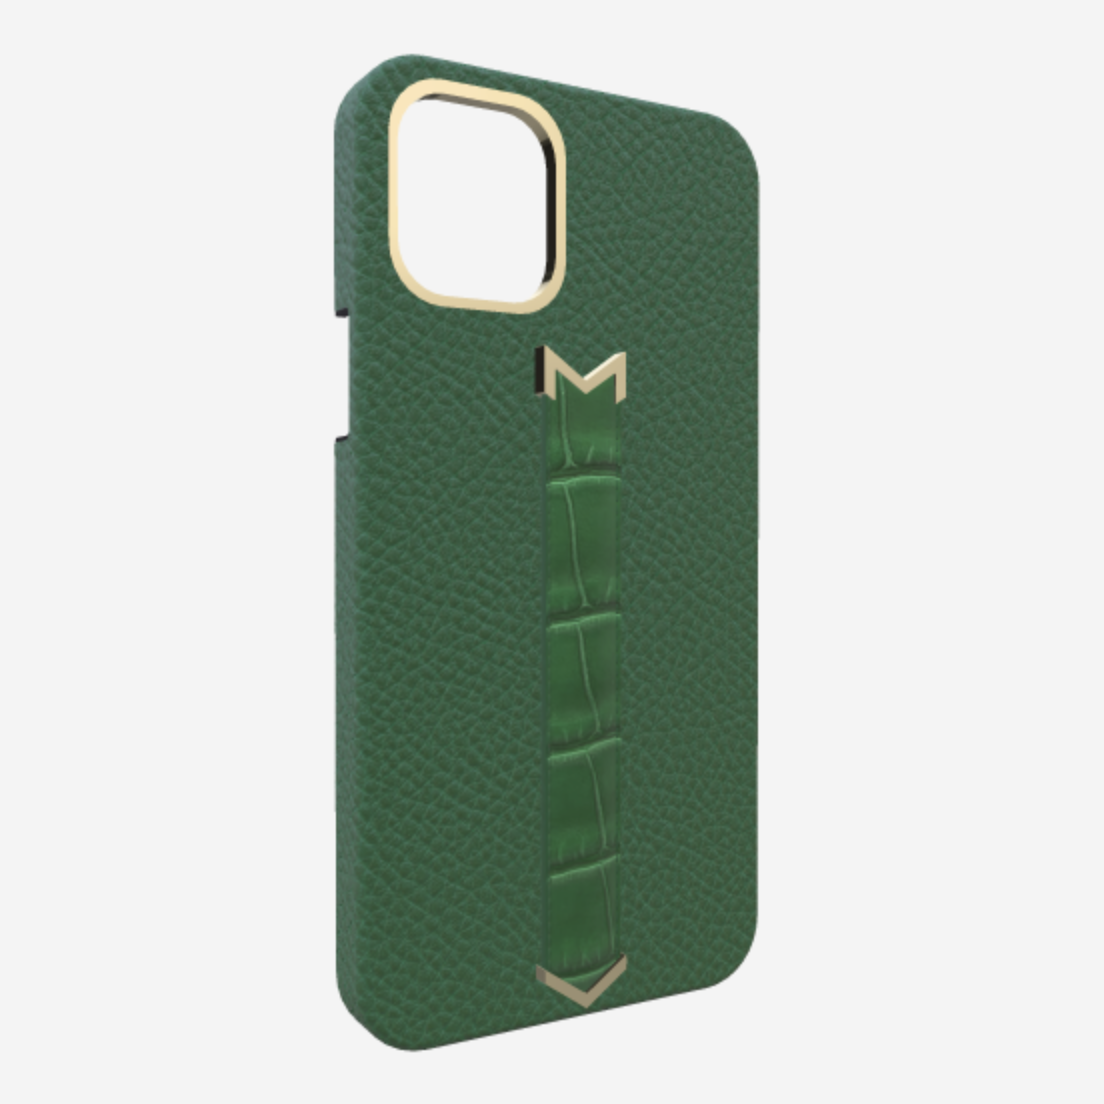 Gold Finger Strap Case for iPhone 13 Pro Max in Genuine Calfskin and Alligator Emerald Green Emerald Green 